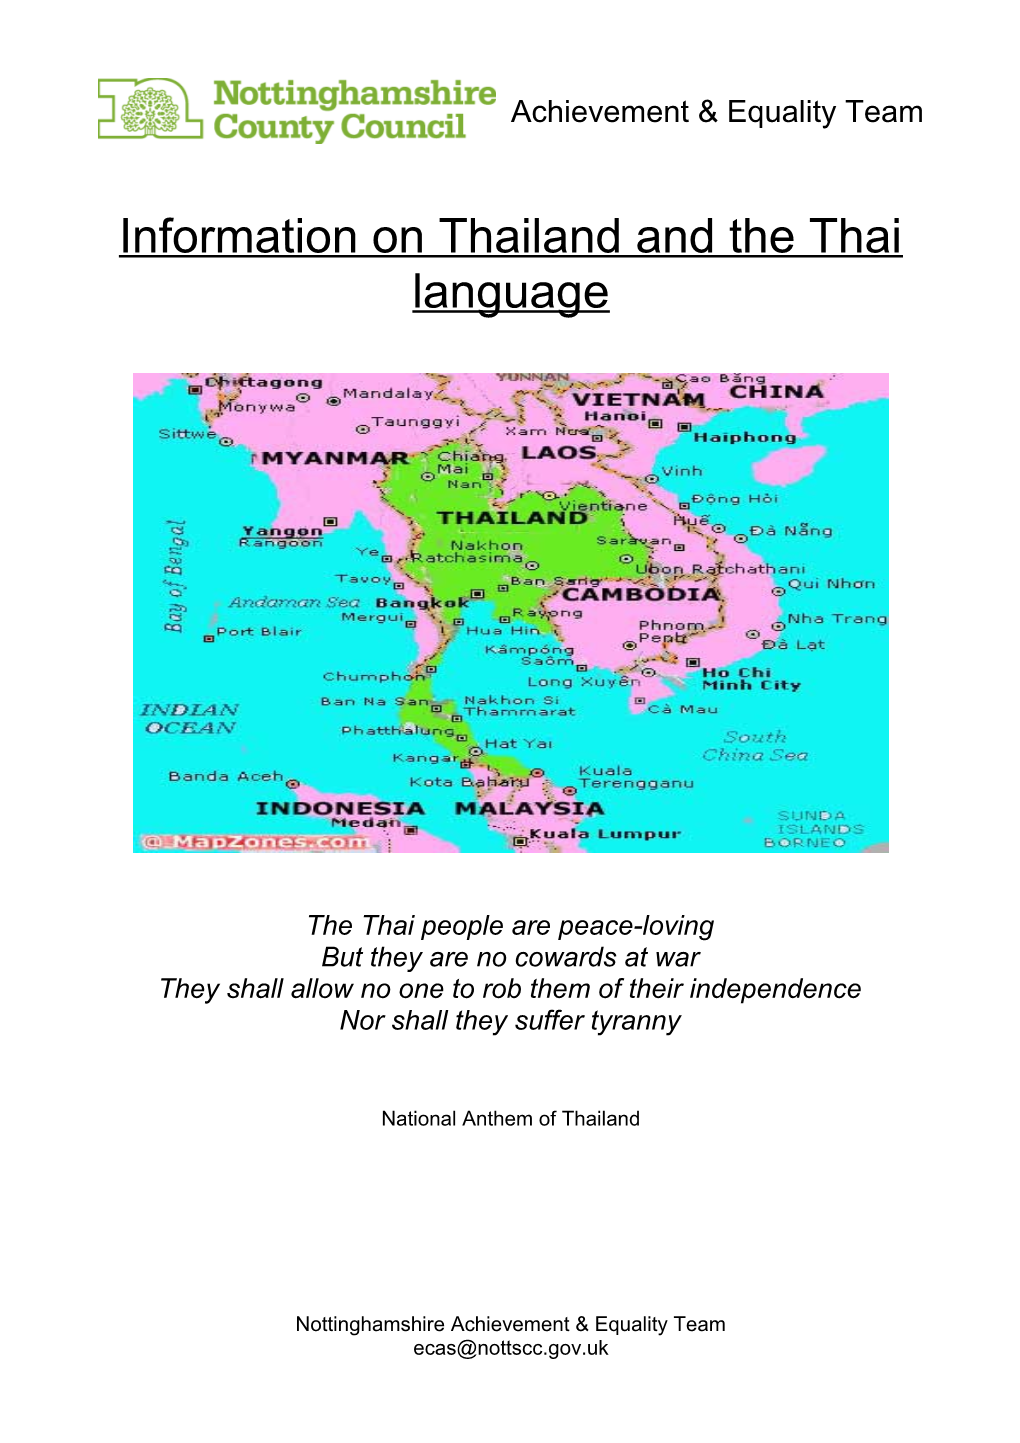 Information on Thailand and the Thai Language